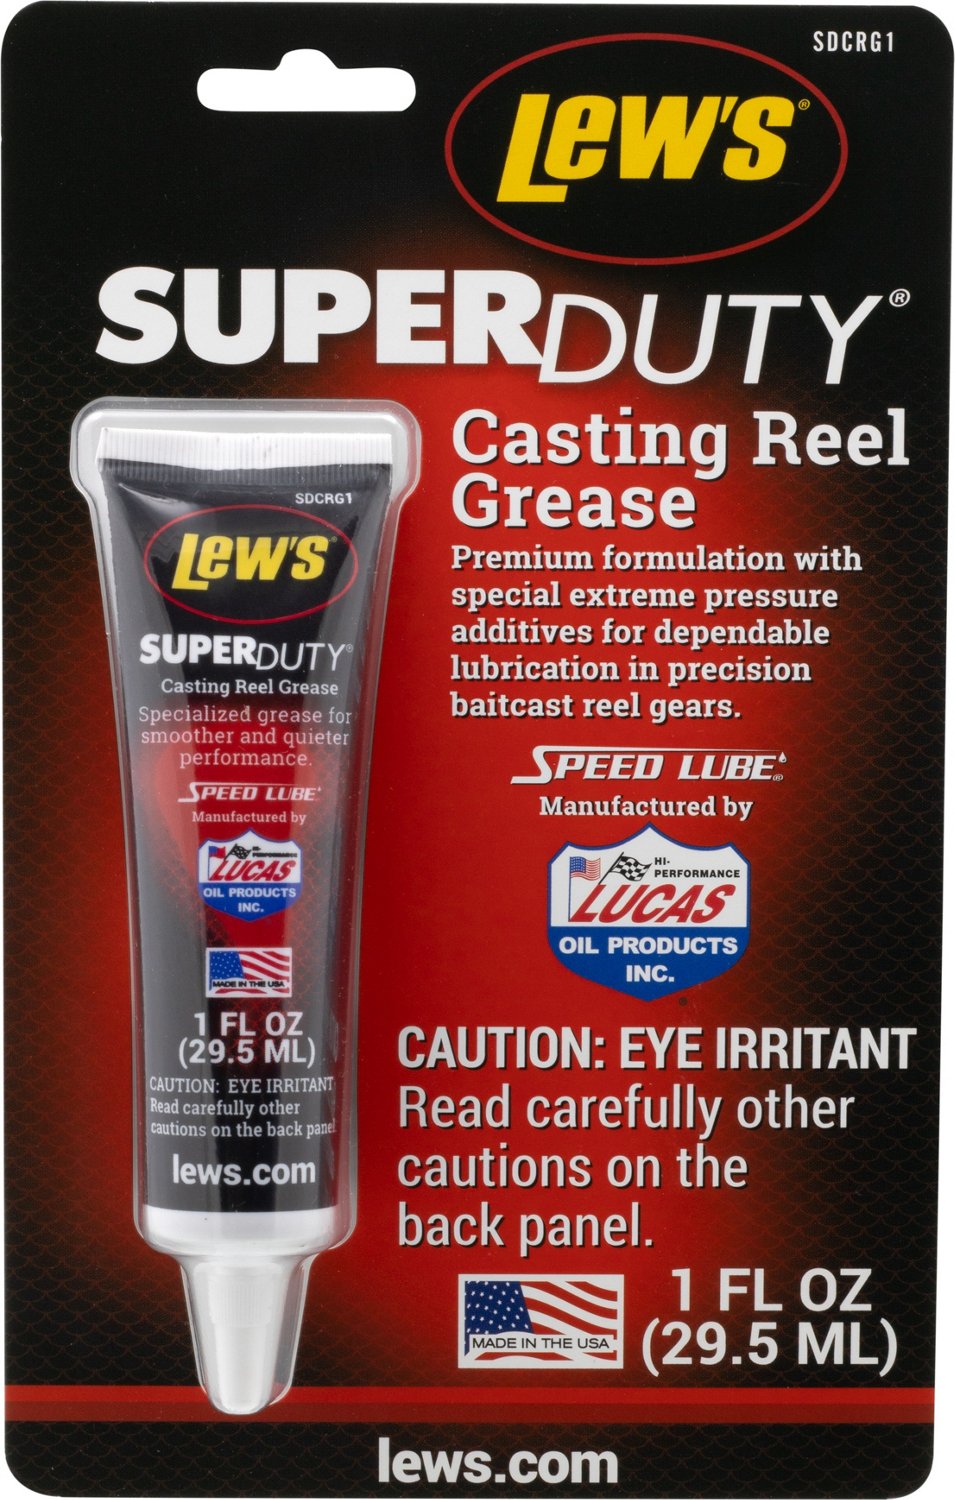 Lew's SuperDuty Casting Reel Grease